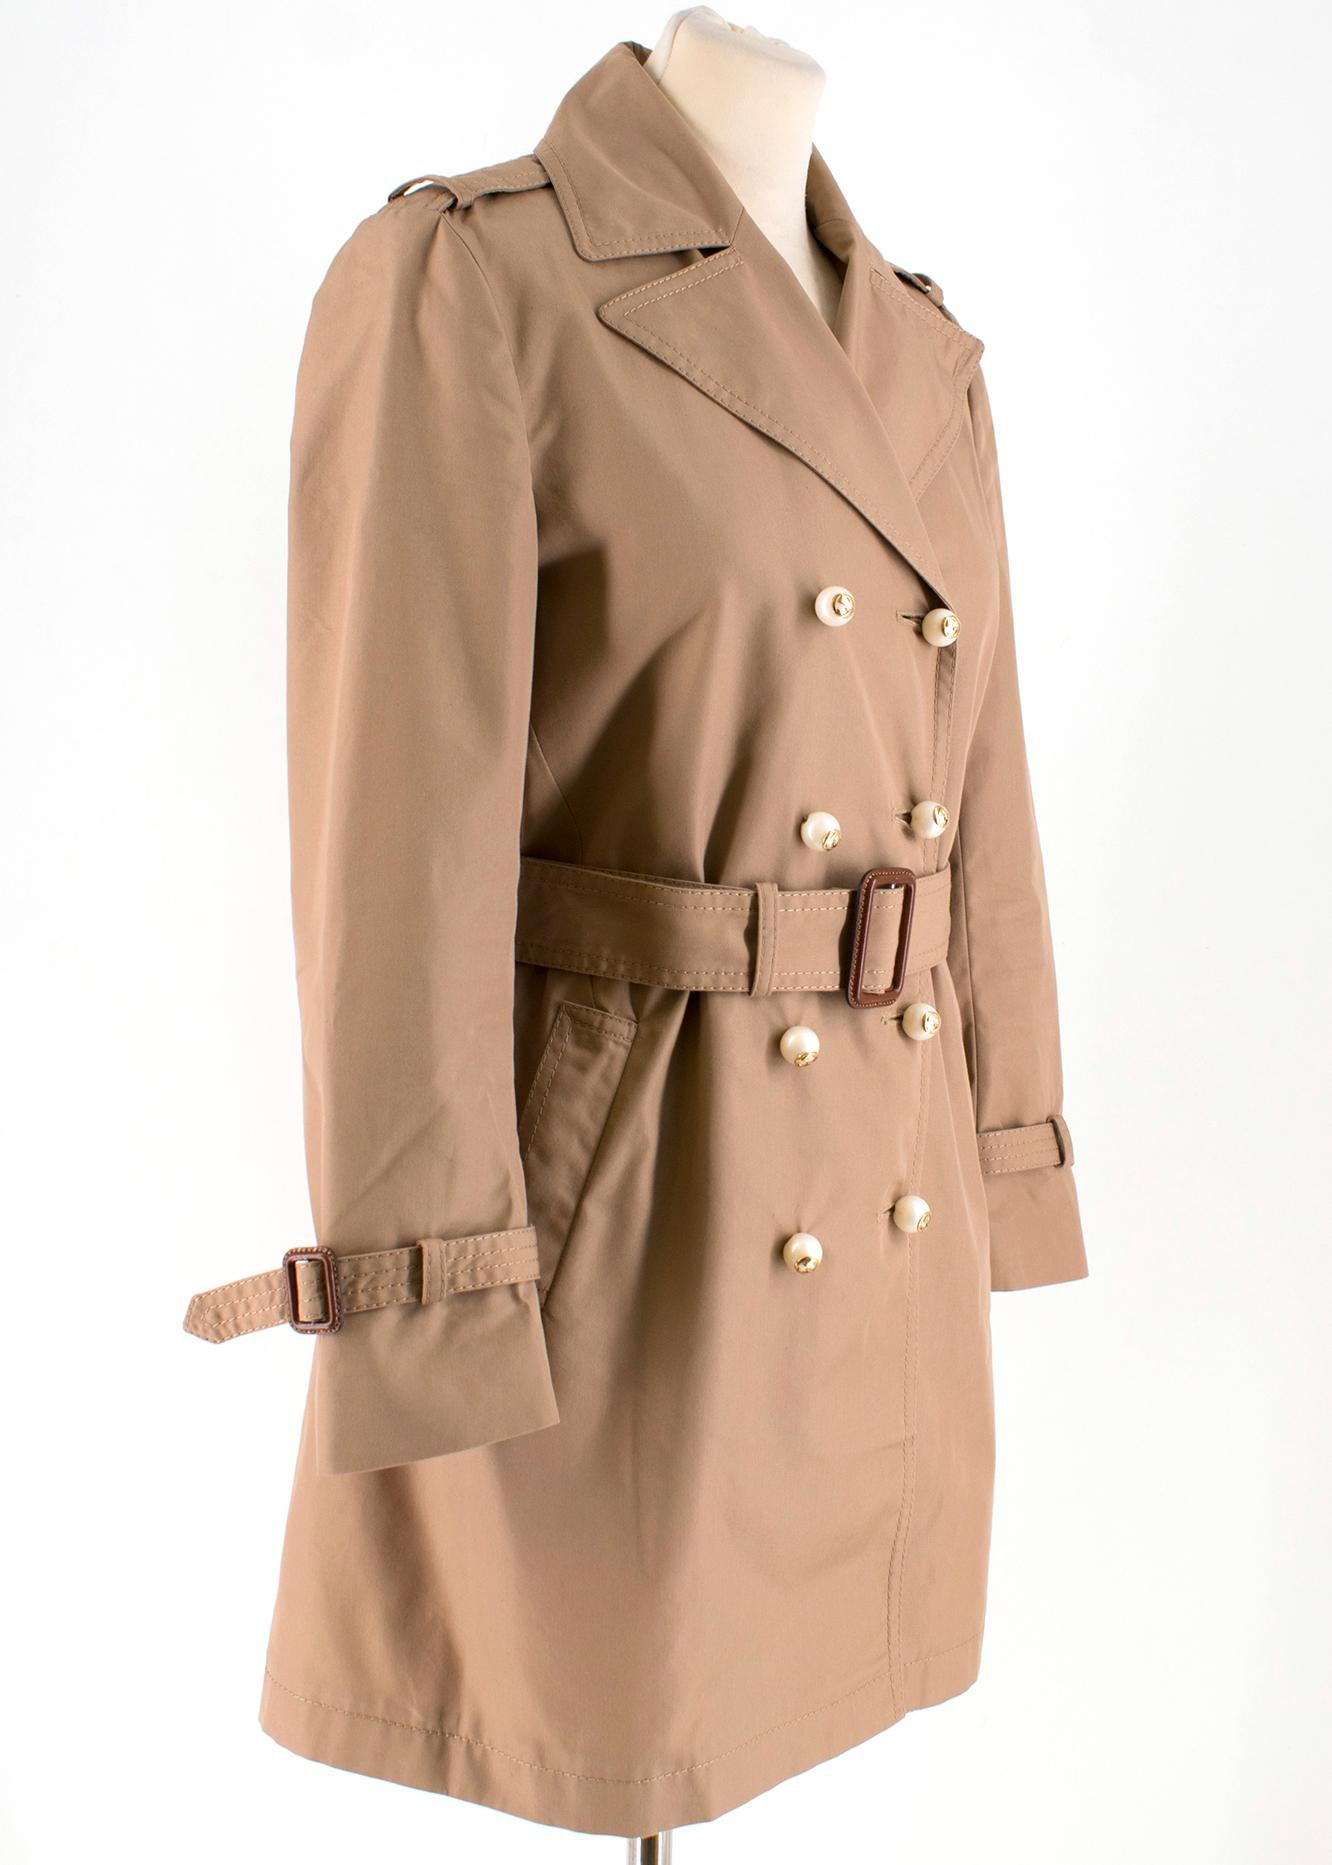 Gucci Brown Faux-Pearl Trench Coat 

- Light Brown Trench Coat 
- Notch lapel, double breasted 
- Faux-pearl logo embellished buttons down center front
- Belted sleeves
- Partial floral print silk at back neck
- Lining at sleeves 
- Side slip